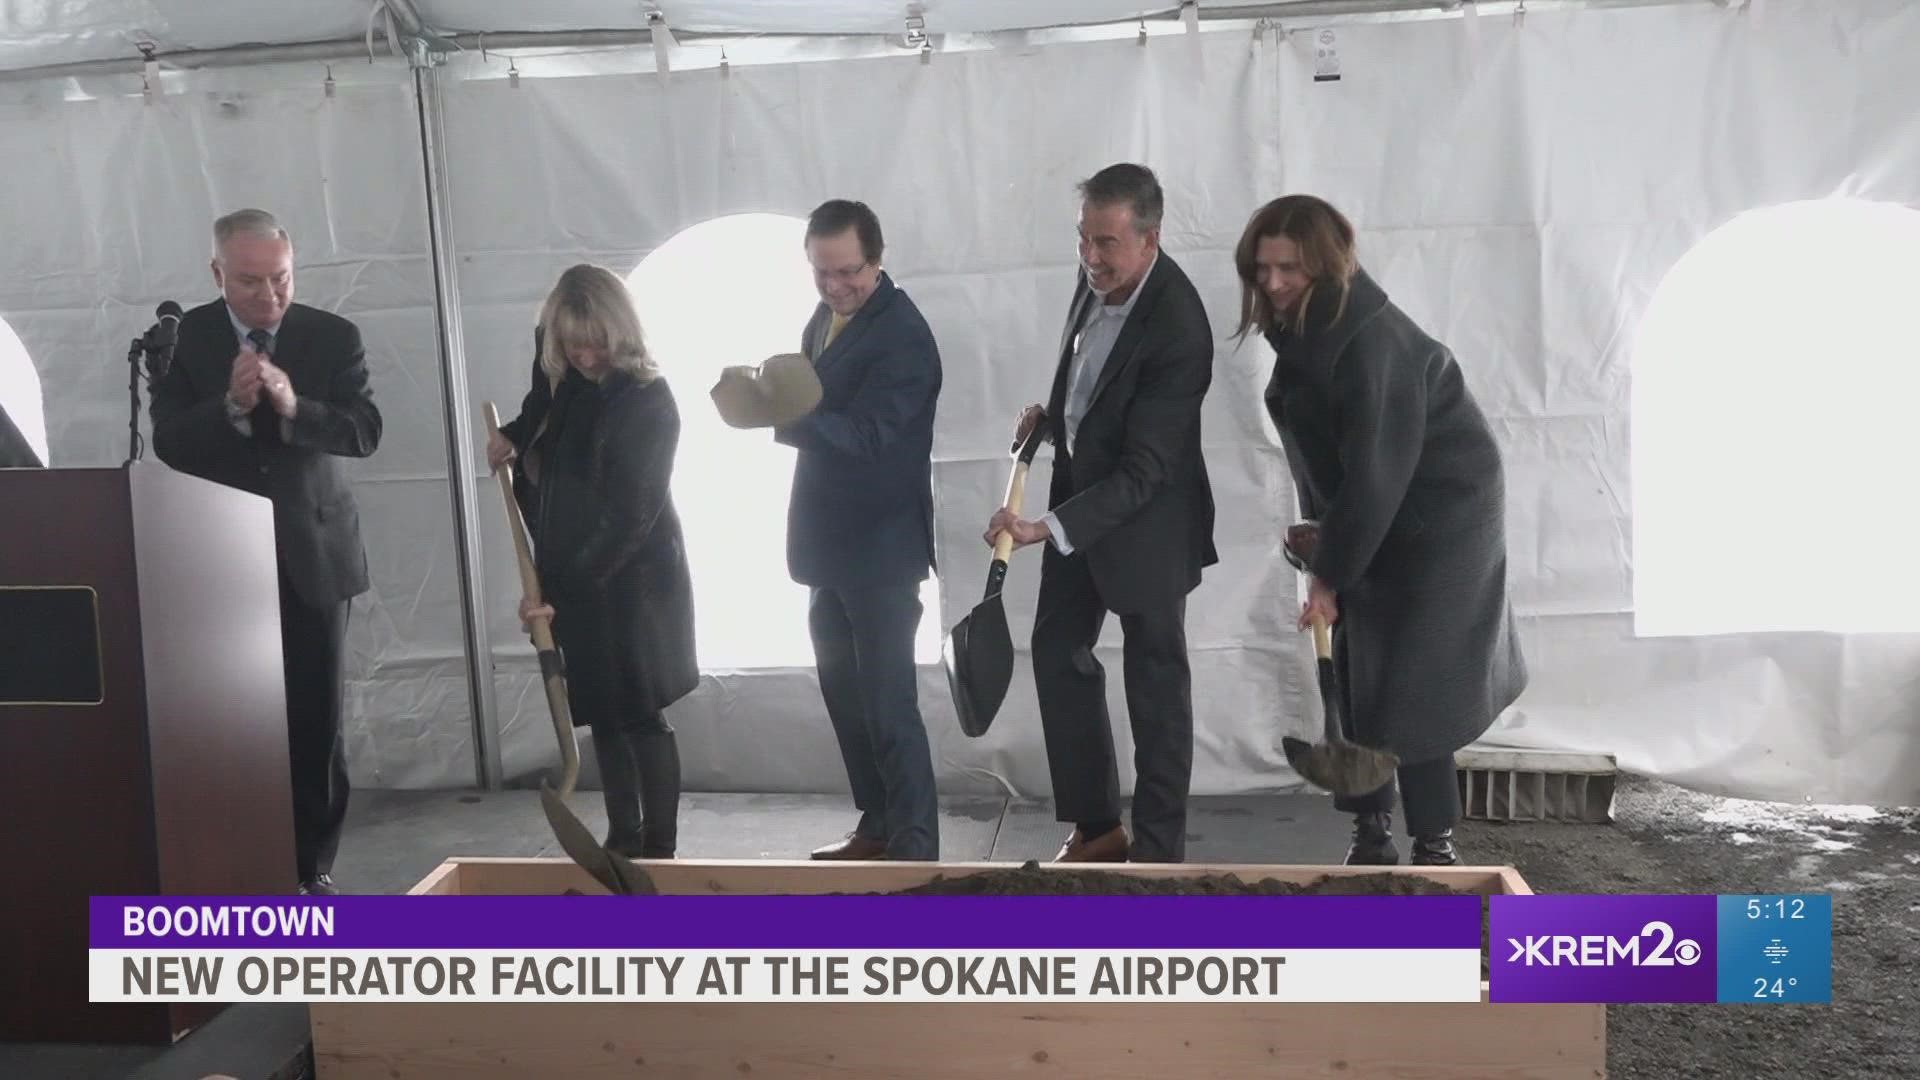 A new 32,000 square foot aircraft service facility is coming to the Spokane Airport. The new facility will hold more than 10 planes.